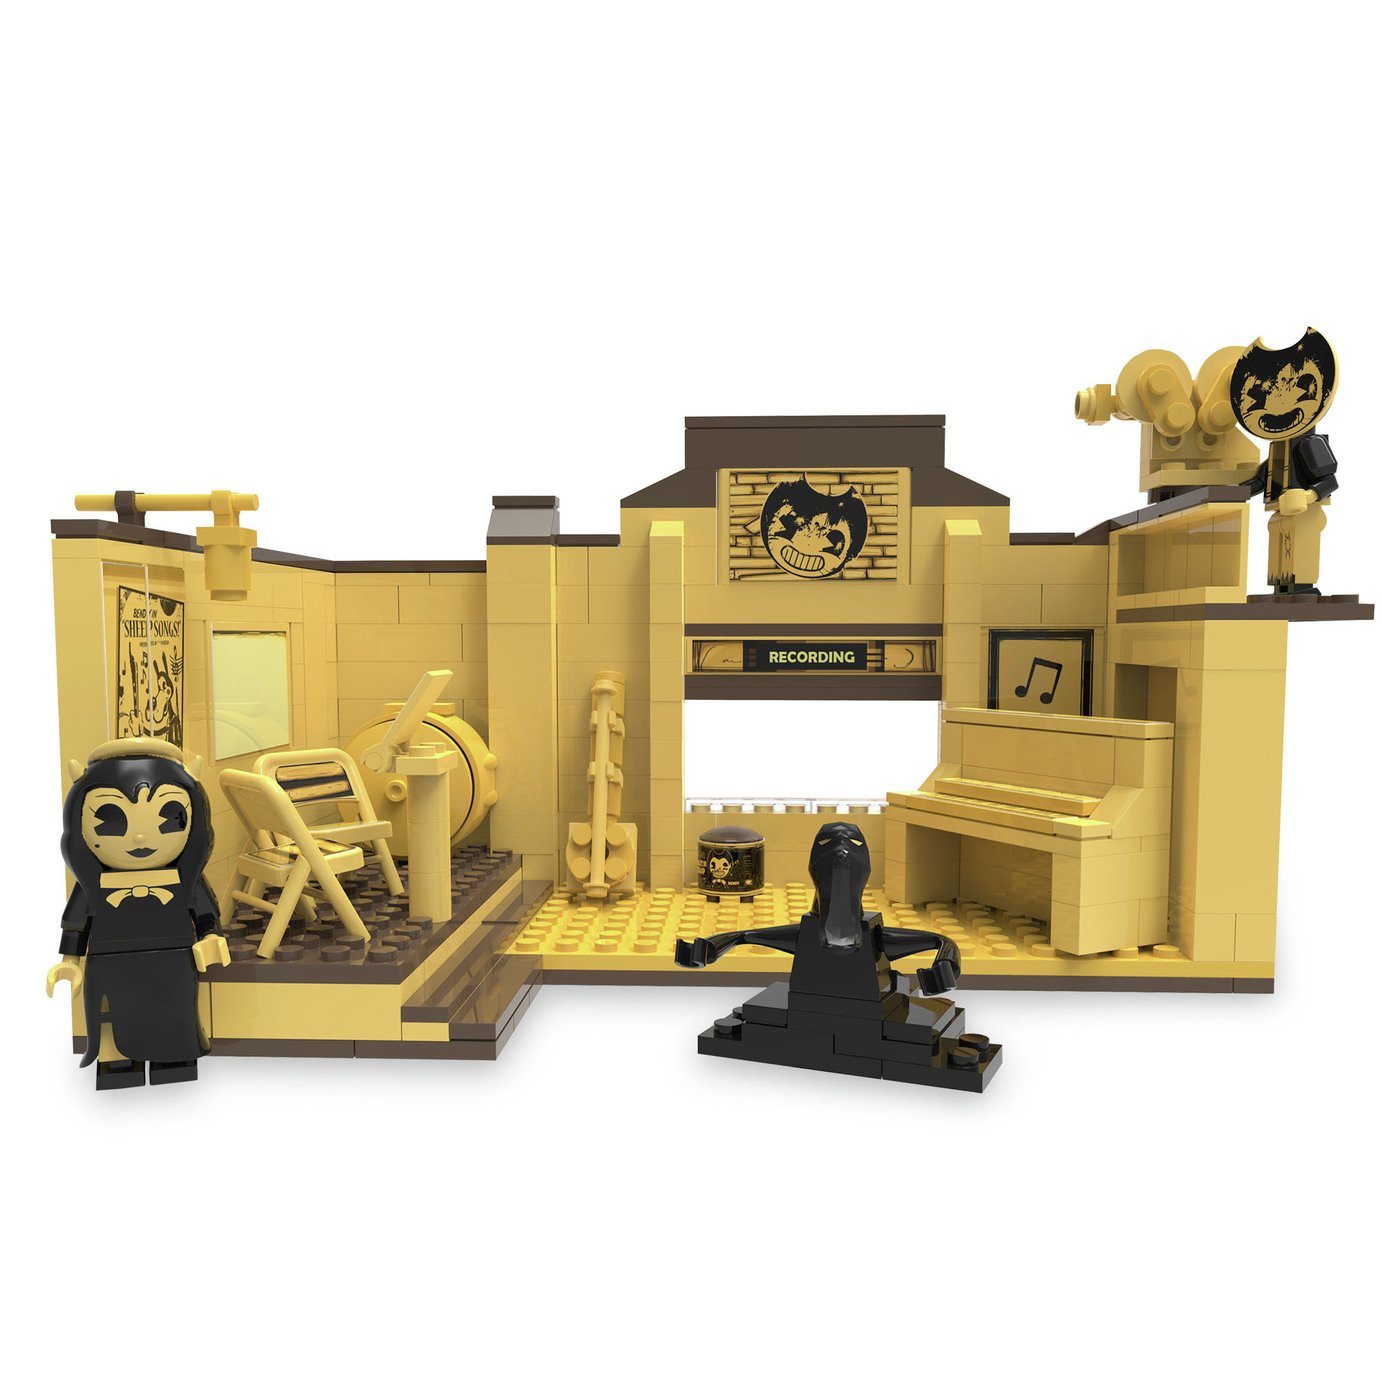 bendy and the ink machine toys uk